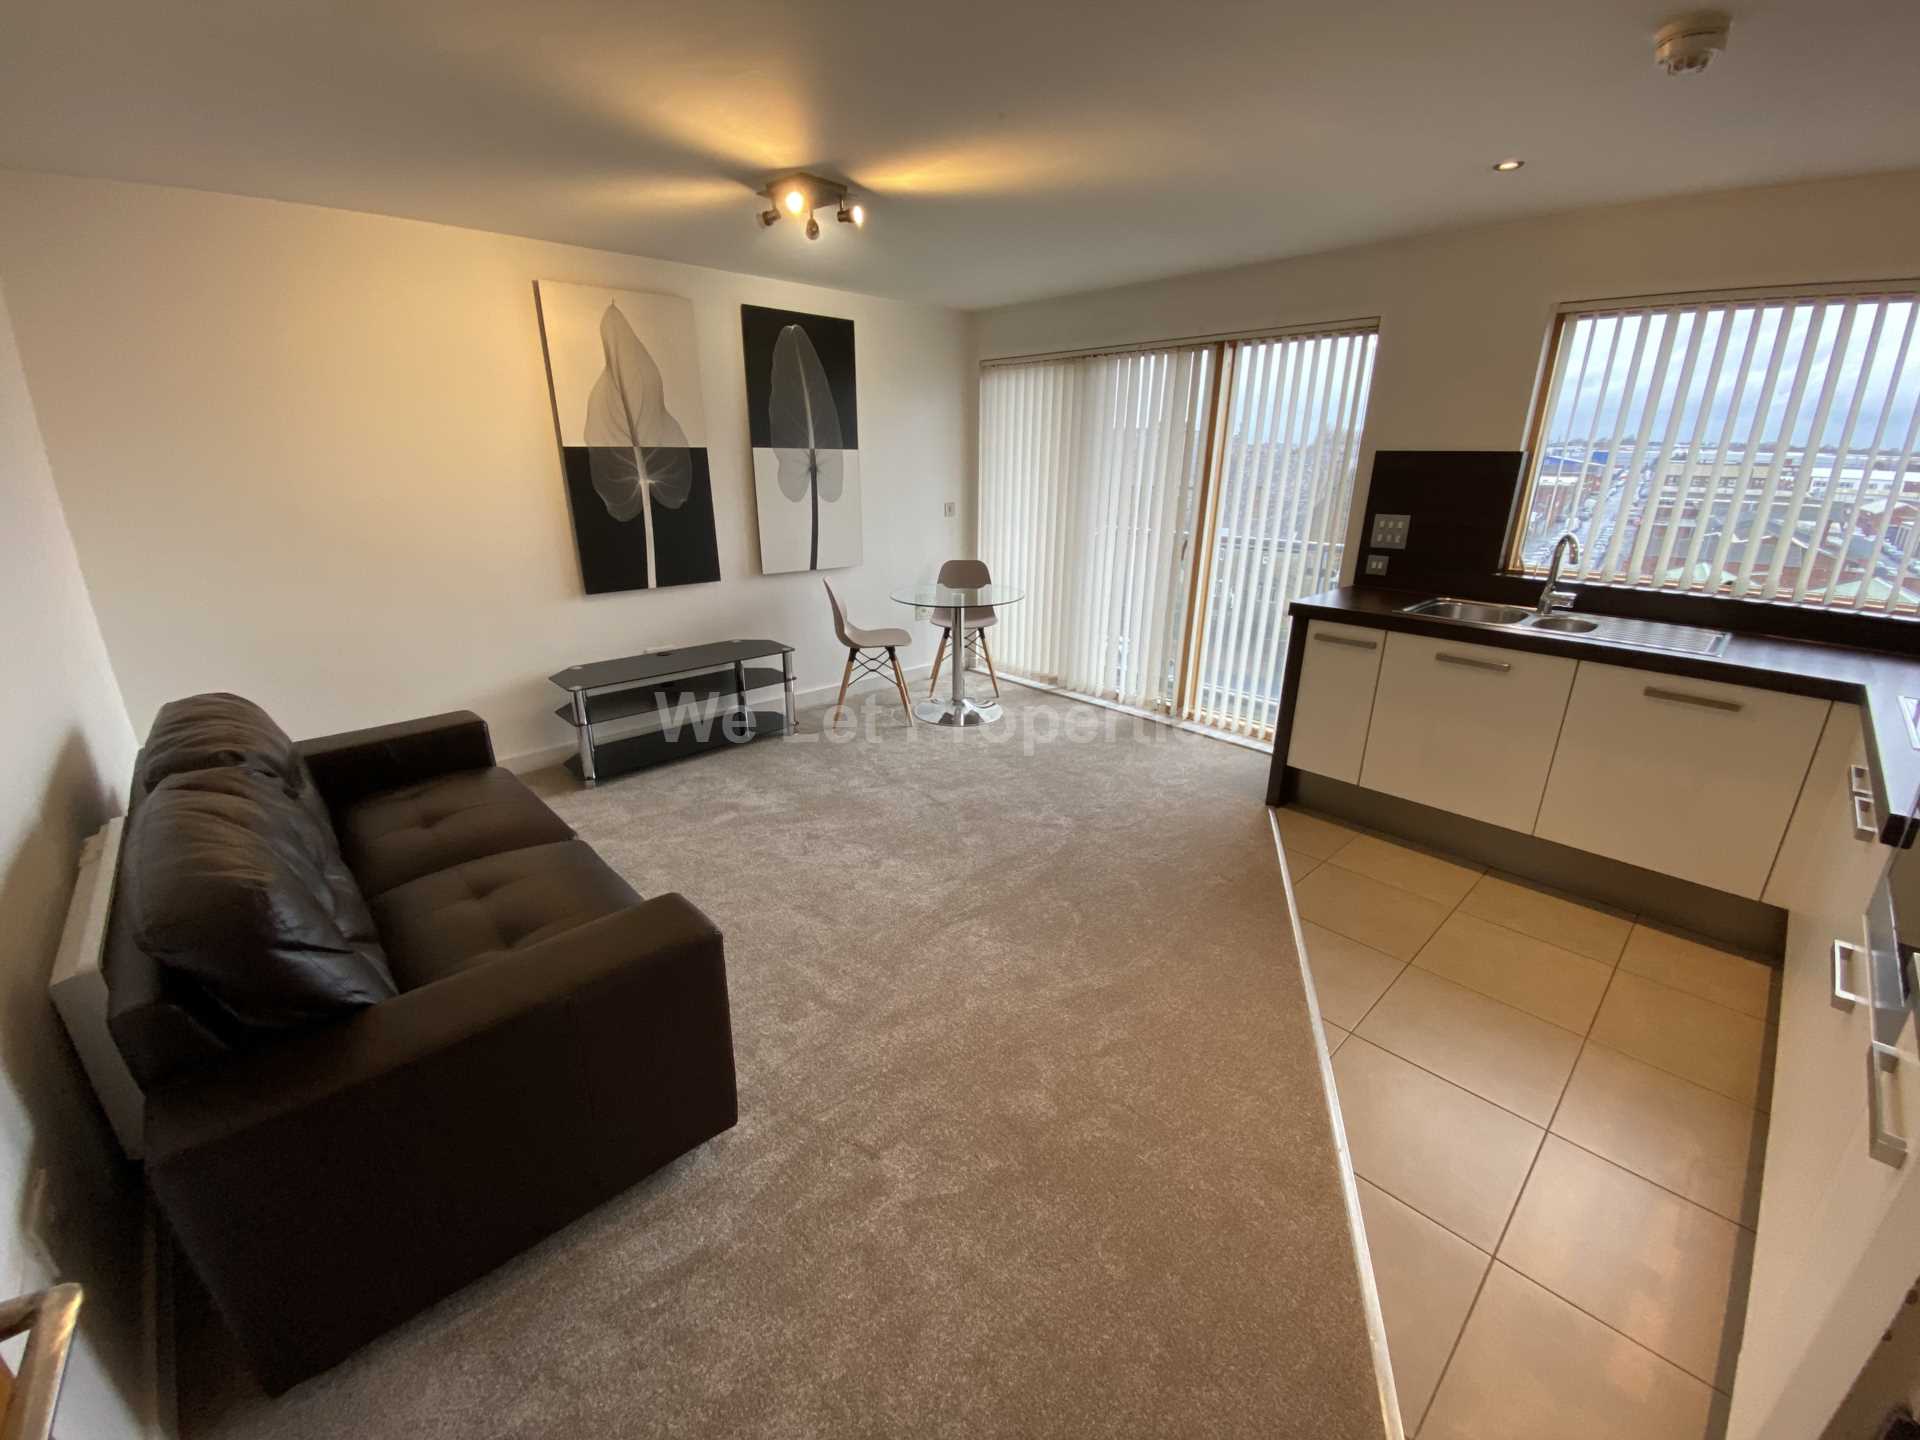 2 bed Apartment for rent in Manchester. From We Let Properties - Manchester